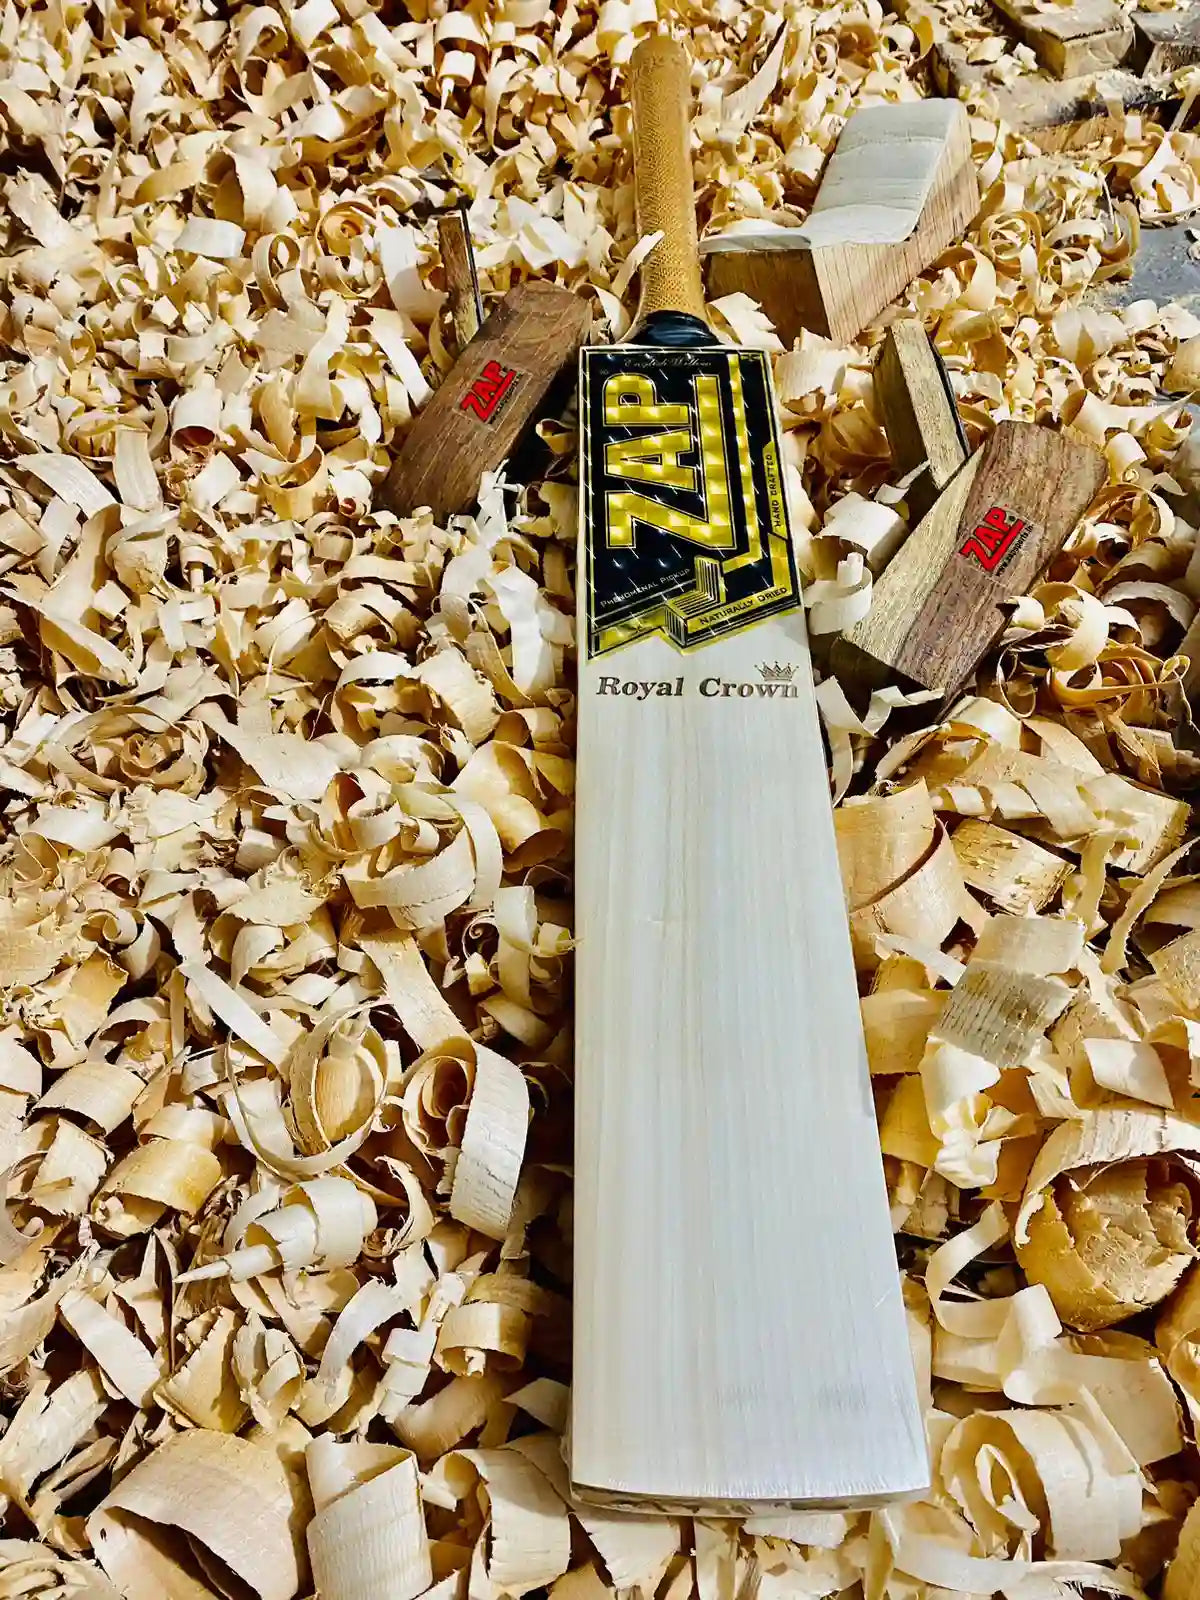 The ZAP Royal Crown Cricket Bat, which sits at the Zenith of Cricket Bats